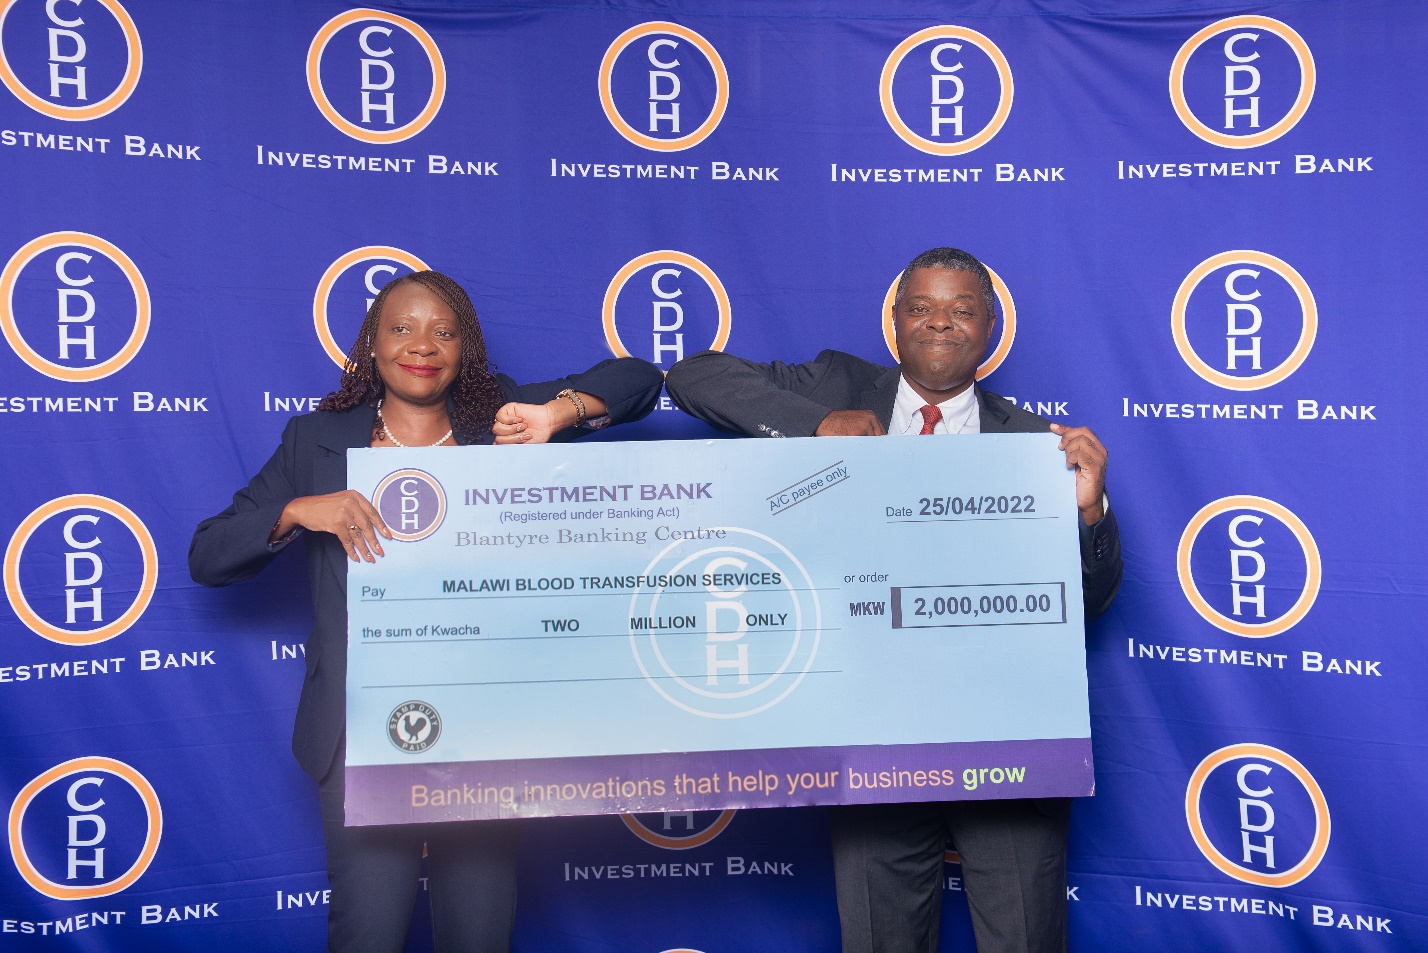 Beatrix Mosiwa, Executive Director – Finance and Operations, CDH Investment Bank hands over funds to Chifundo Mmaniwa, Chief Operations Officer, Bankers Association of Malawi 